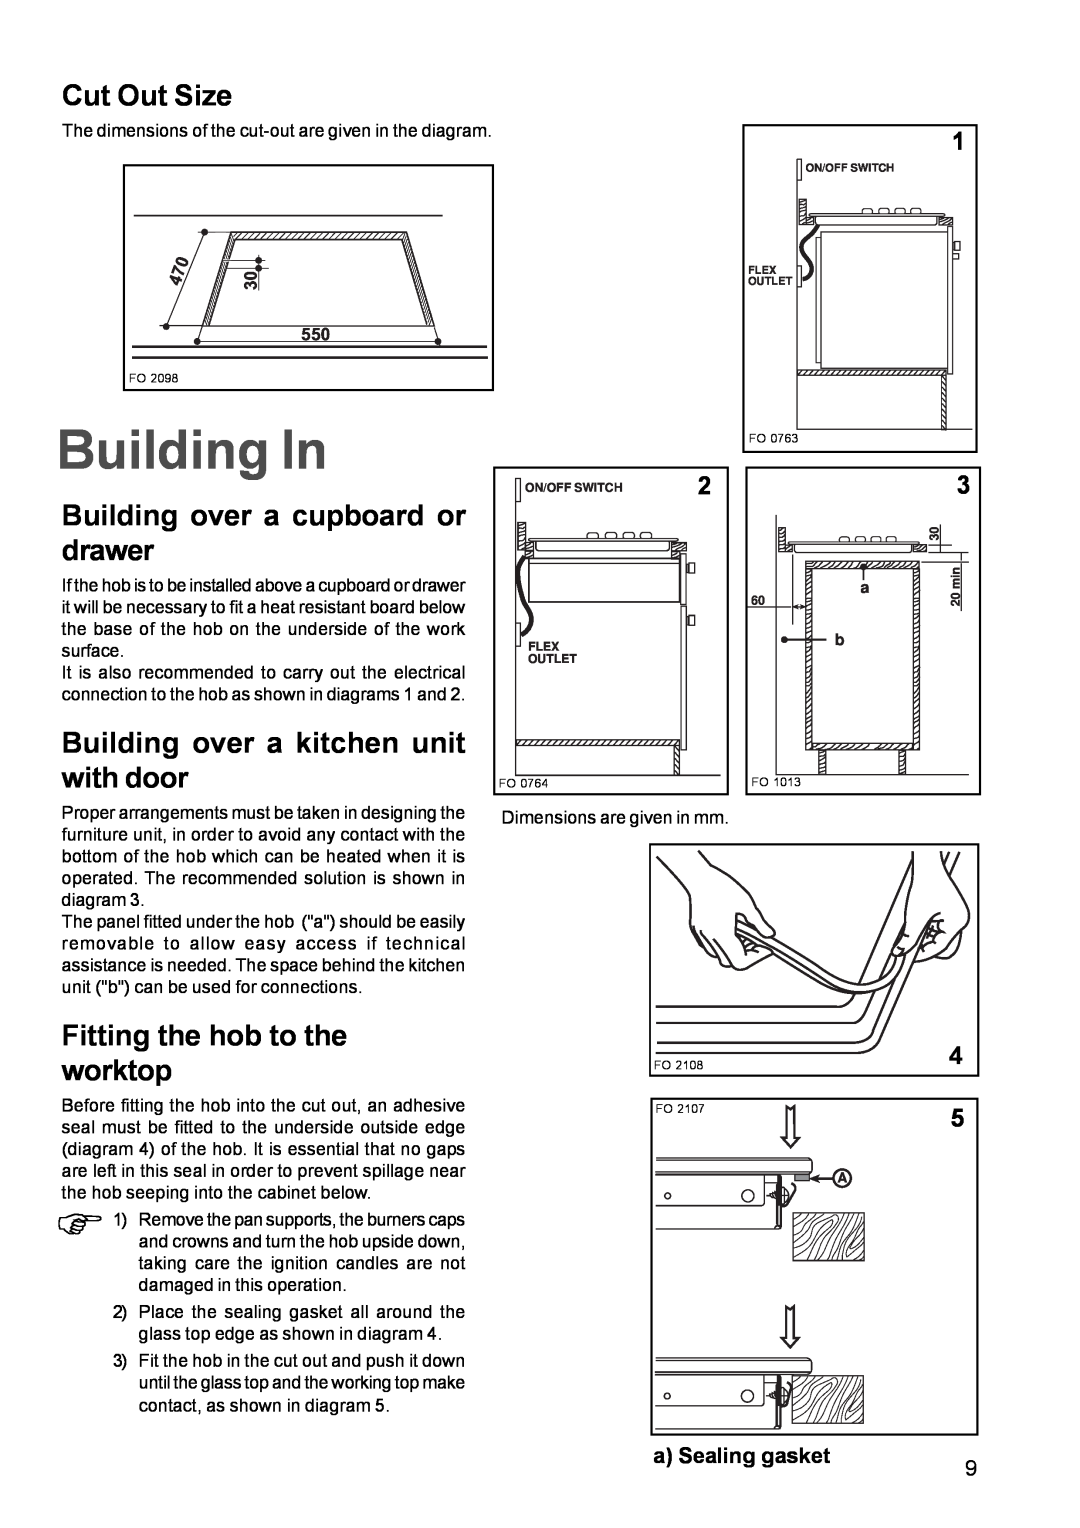 Electrolux EGG 690 Building In, Cut Out Size, Building over a cupboard or drawer, Building over a kitchen unit with door 